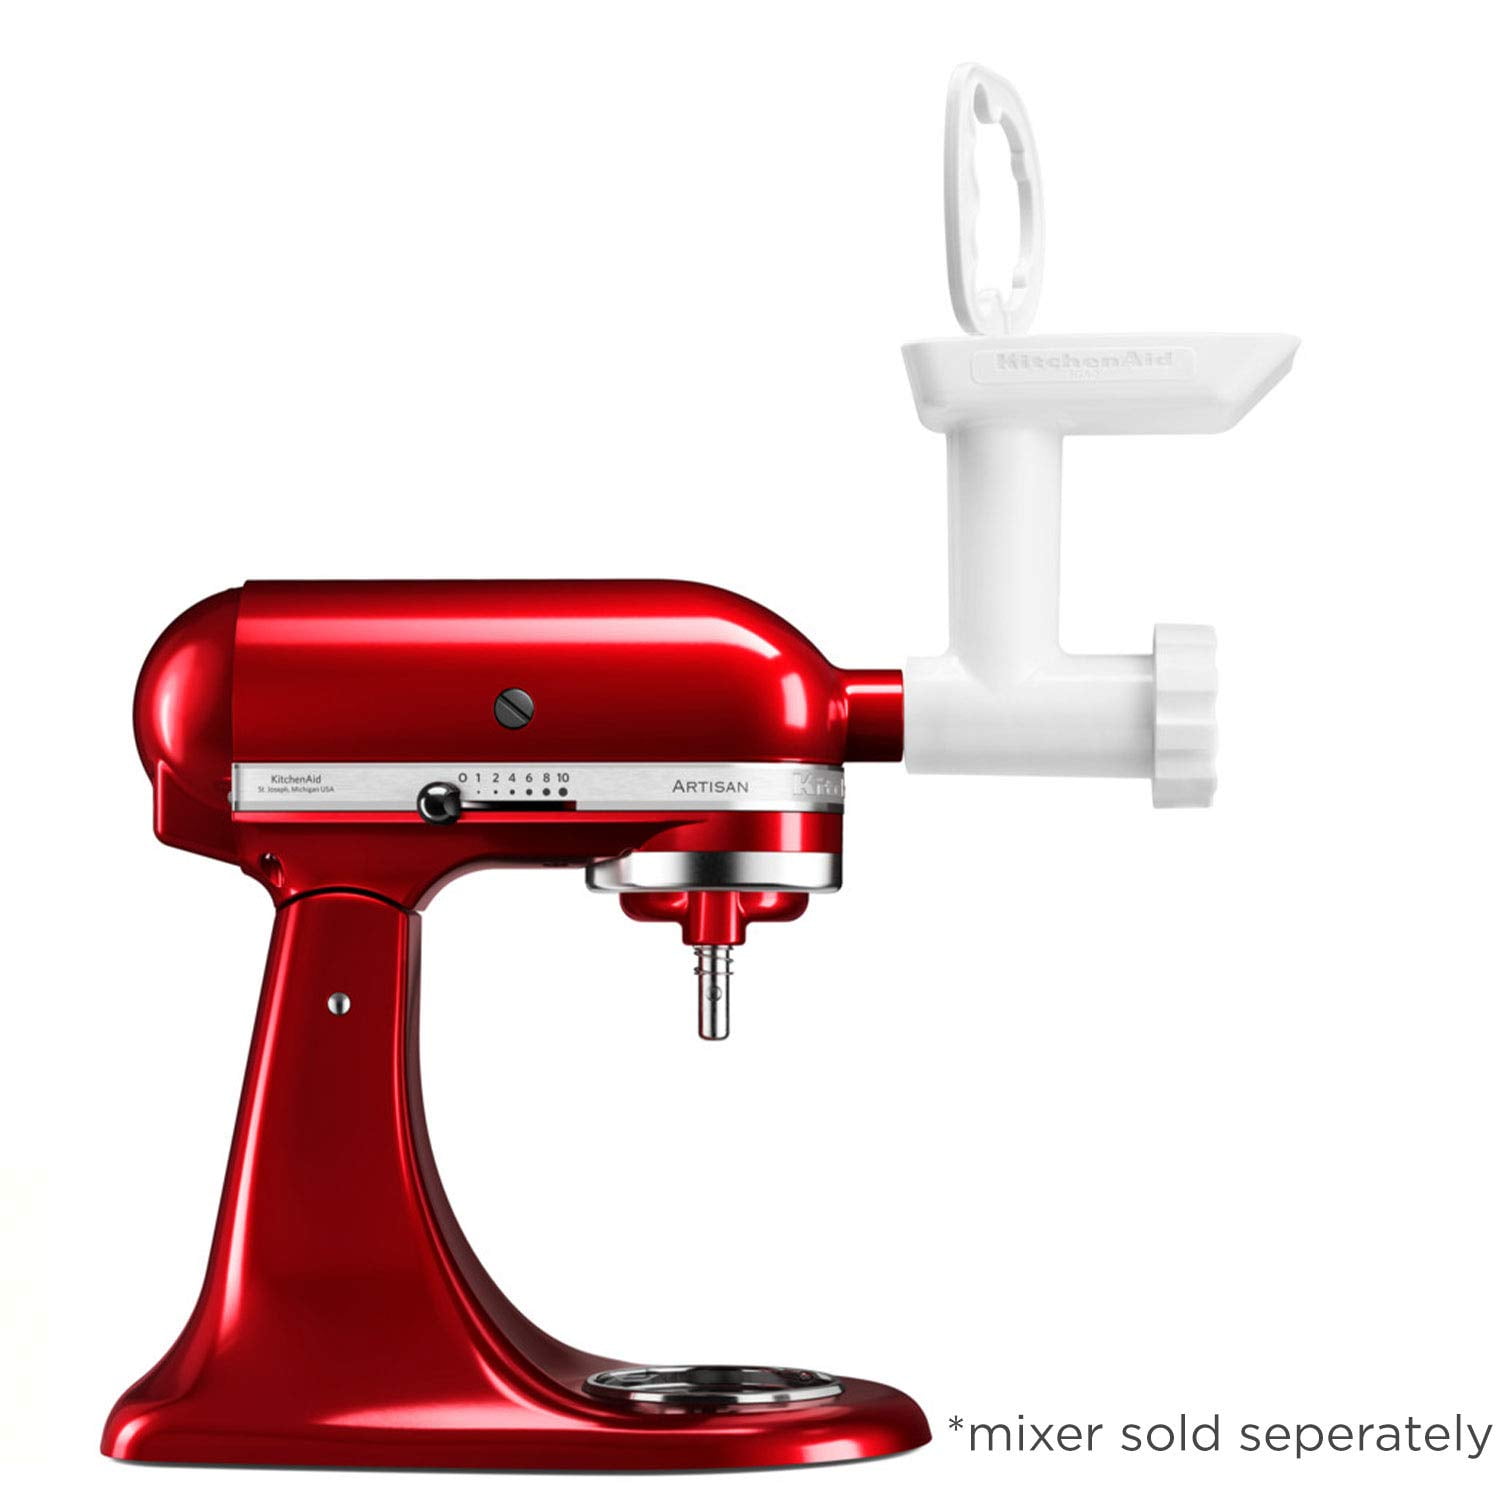 Product Review – KitchenAid FGA Food Grinder Attachment for Stand Mixers